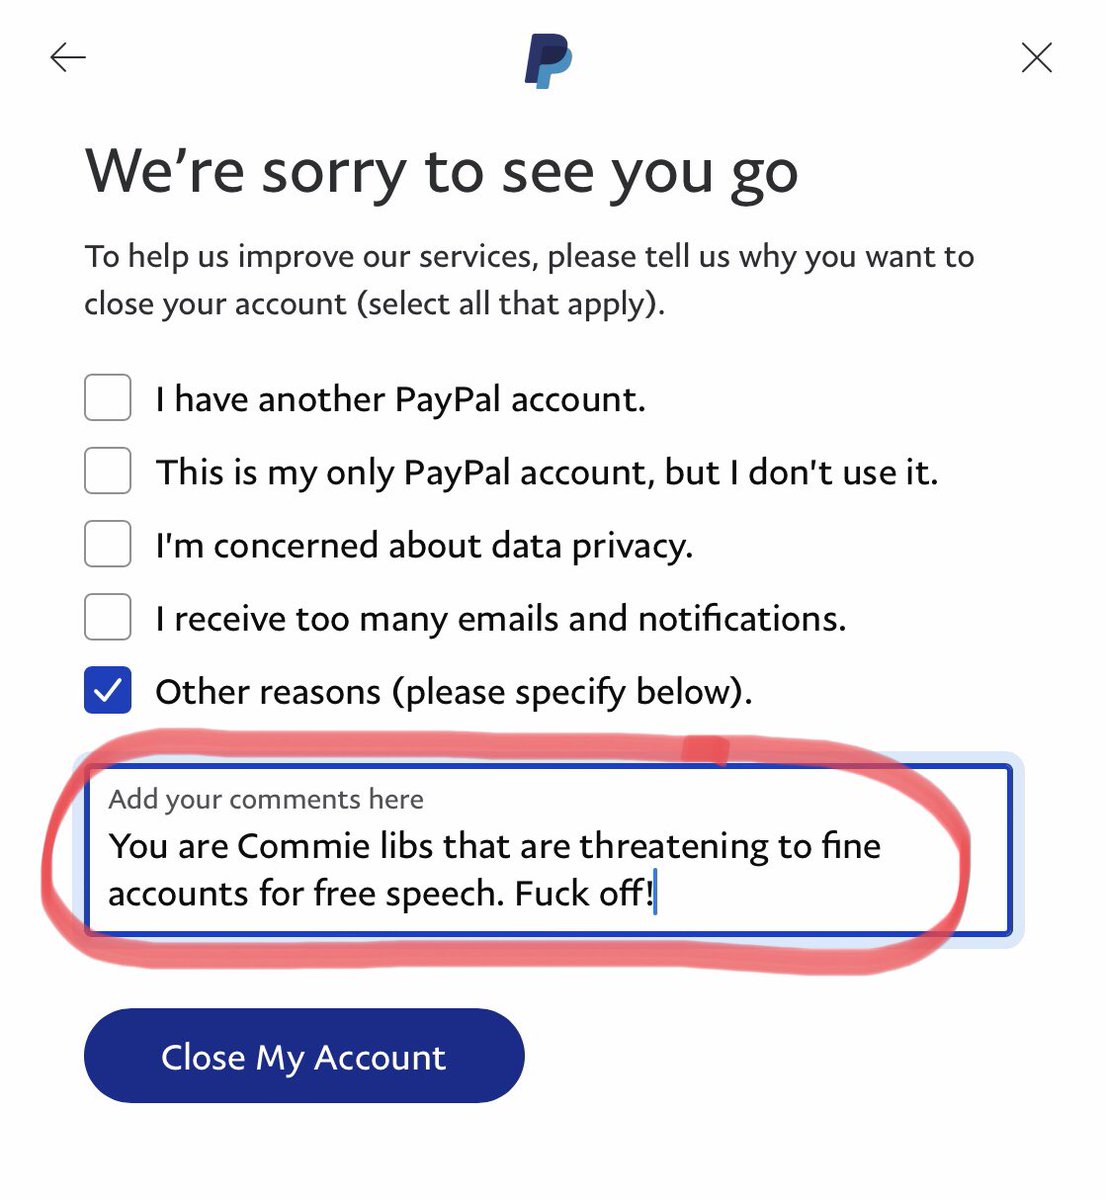 Dropped those Commie asswipes yesterday.

#boycottpaypal